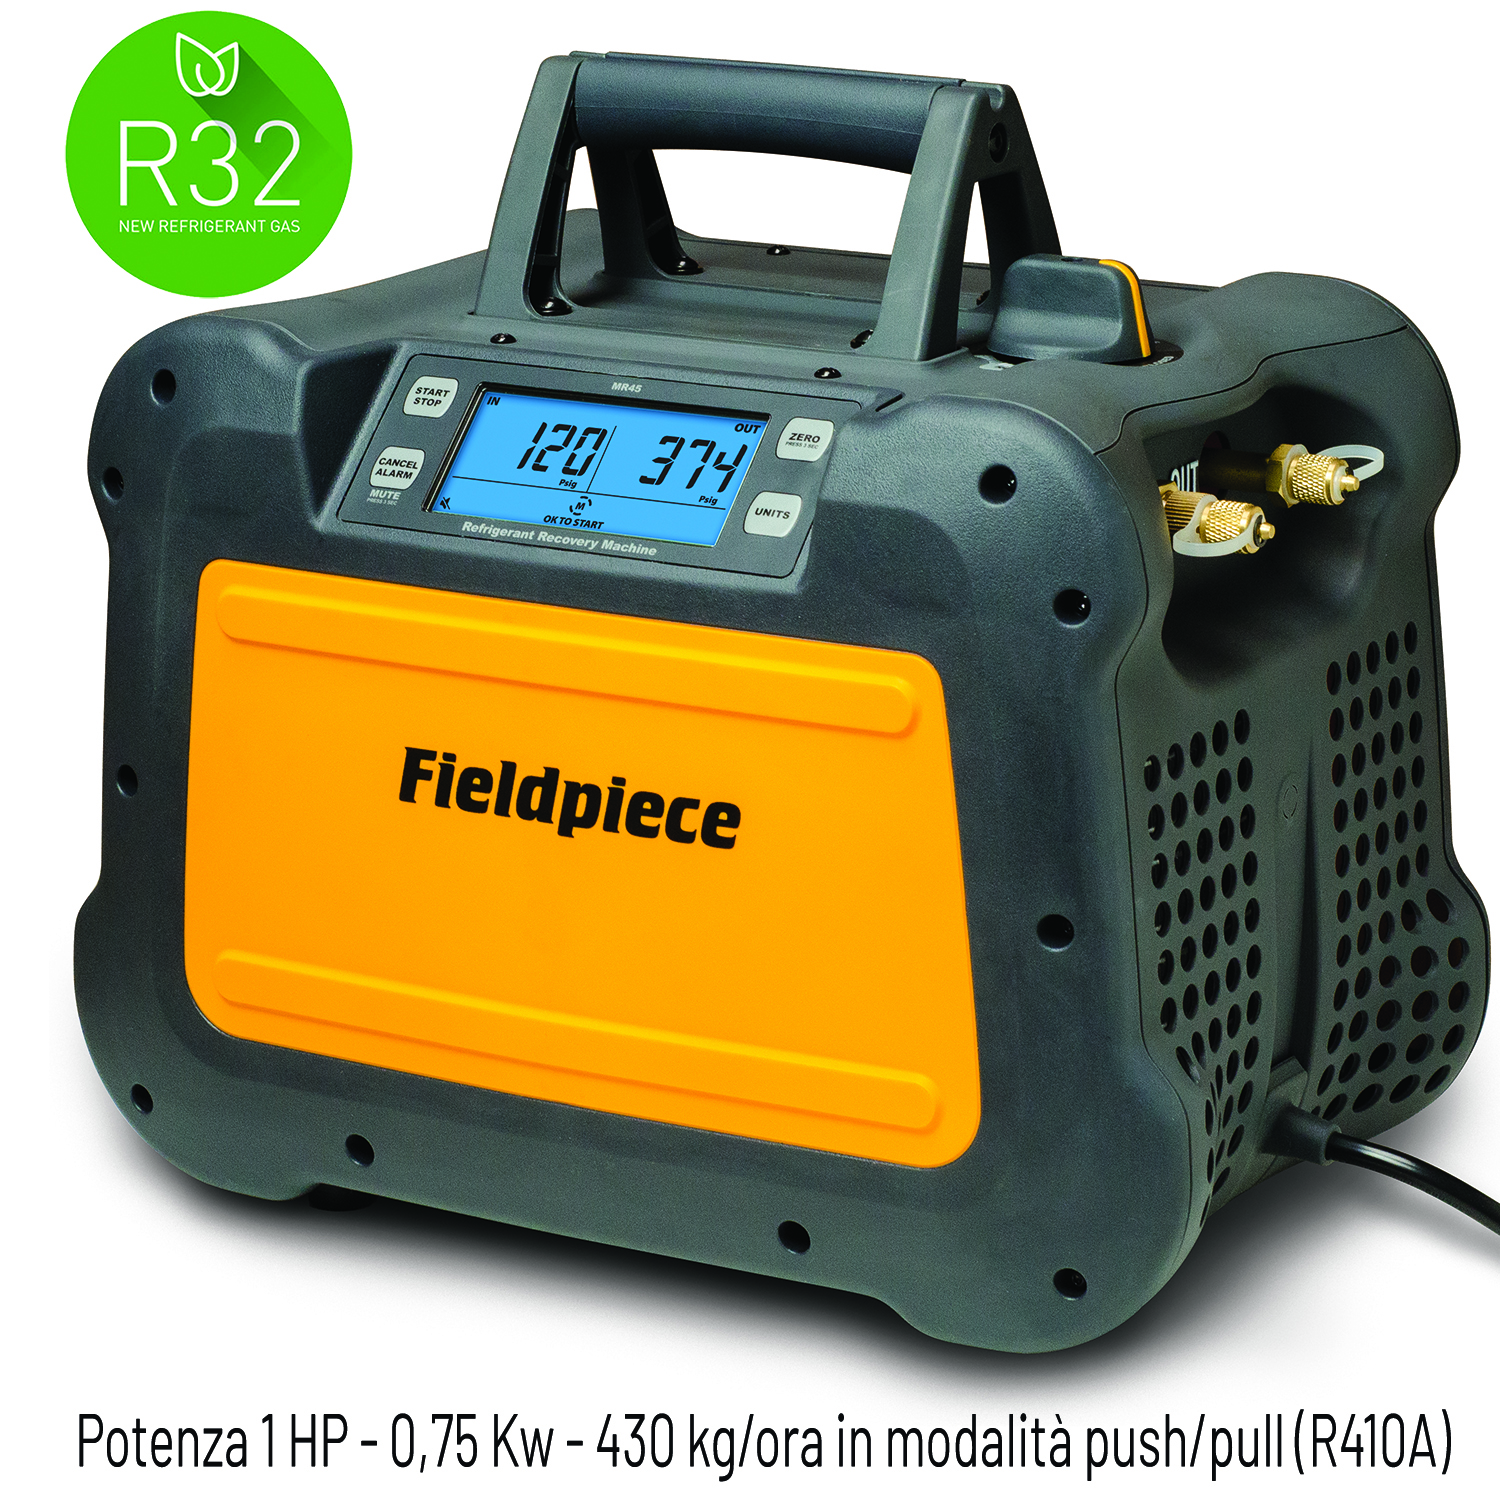 Fieldpiece USA - MR45INT Digital Recovery Machine 1 HP - 0,75 Kw - 430 kg/hour in push/pull mode (R410A)